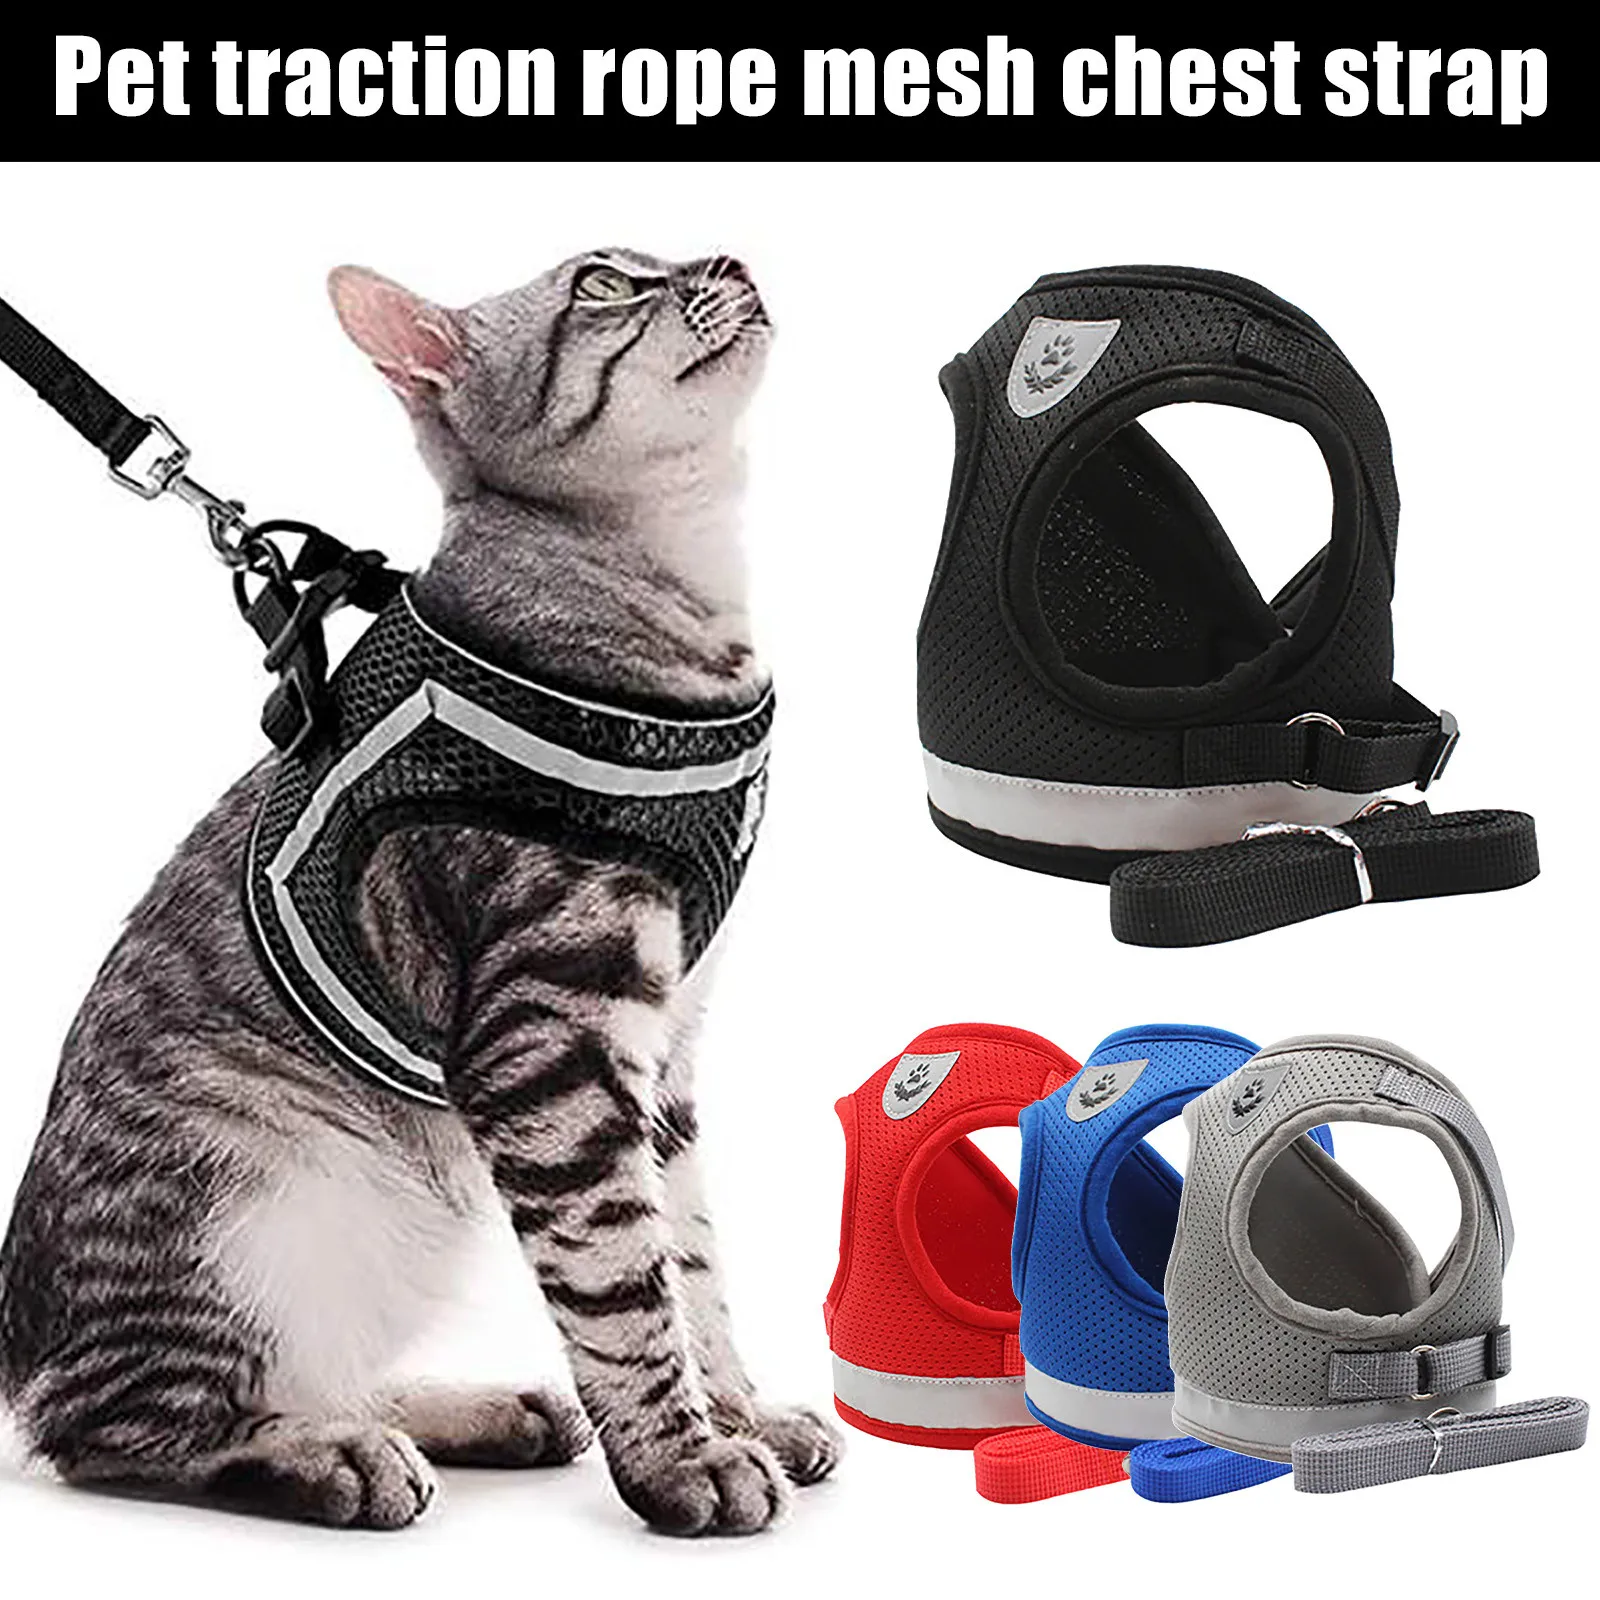 AVCCAVA Kitten Harness with Leash for Walking Escape Proof Soft Cat Harnesses Easy Adjustable Vest Breathable Pet Safety Jacket with 1 Reflective Towing Leash 